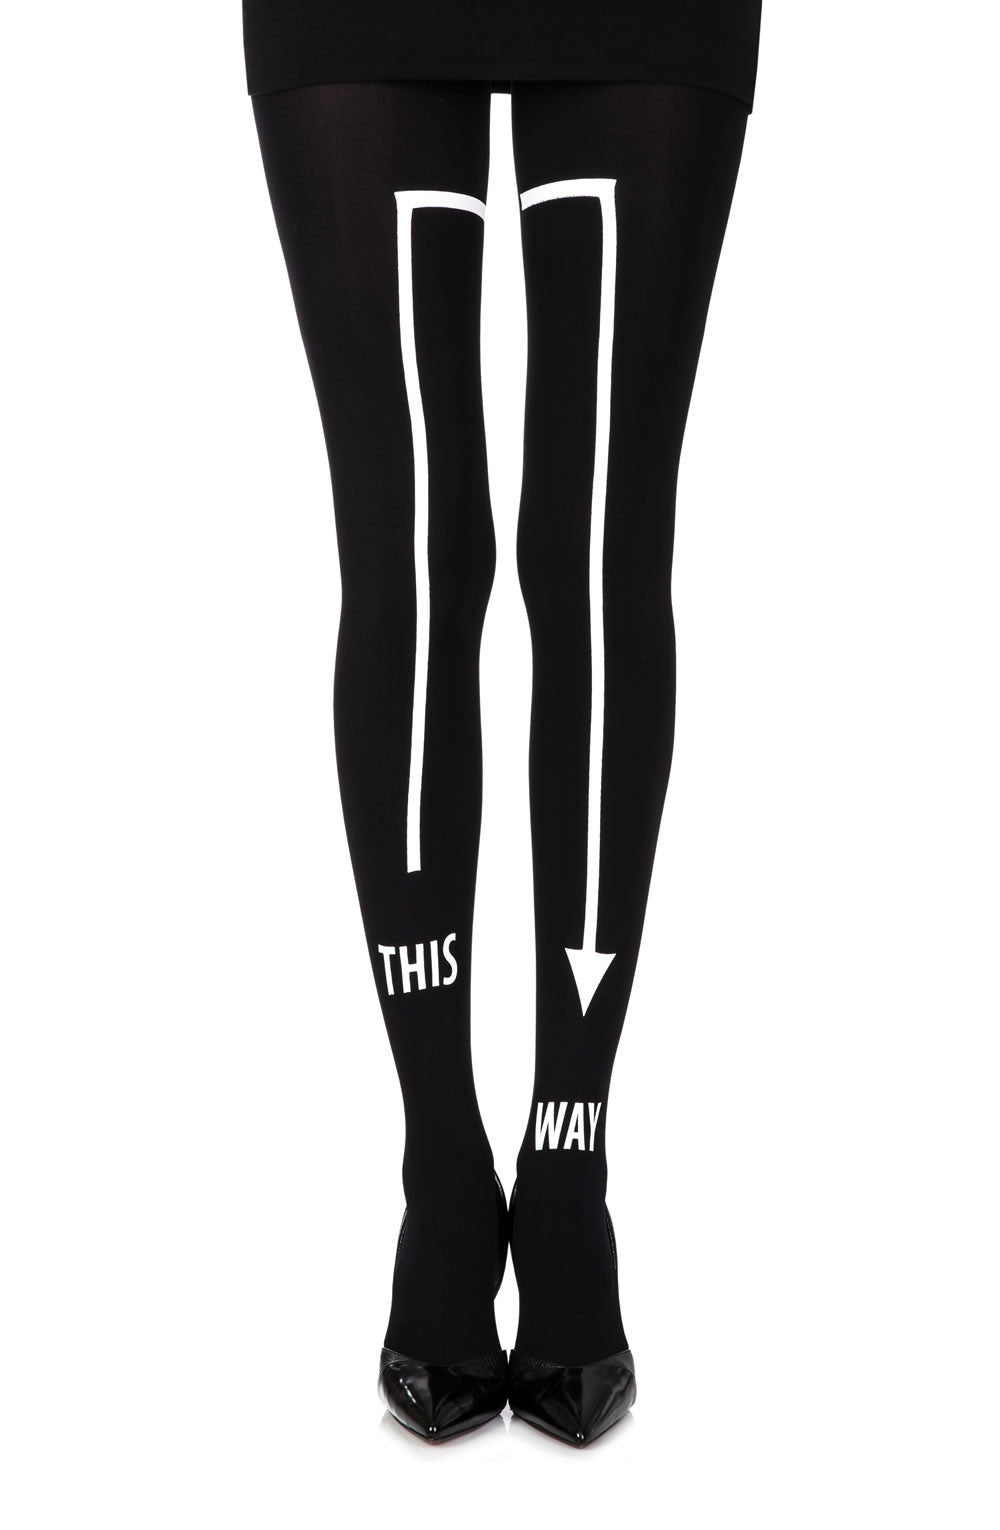 Zohara “This Way” Black Print Tights  All Offers, Hosiery, NEWLY-IMPORTED, Tights, Zohara - So Luxe Lingerie